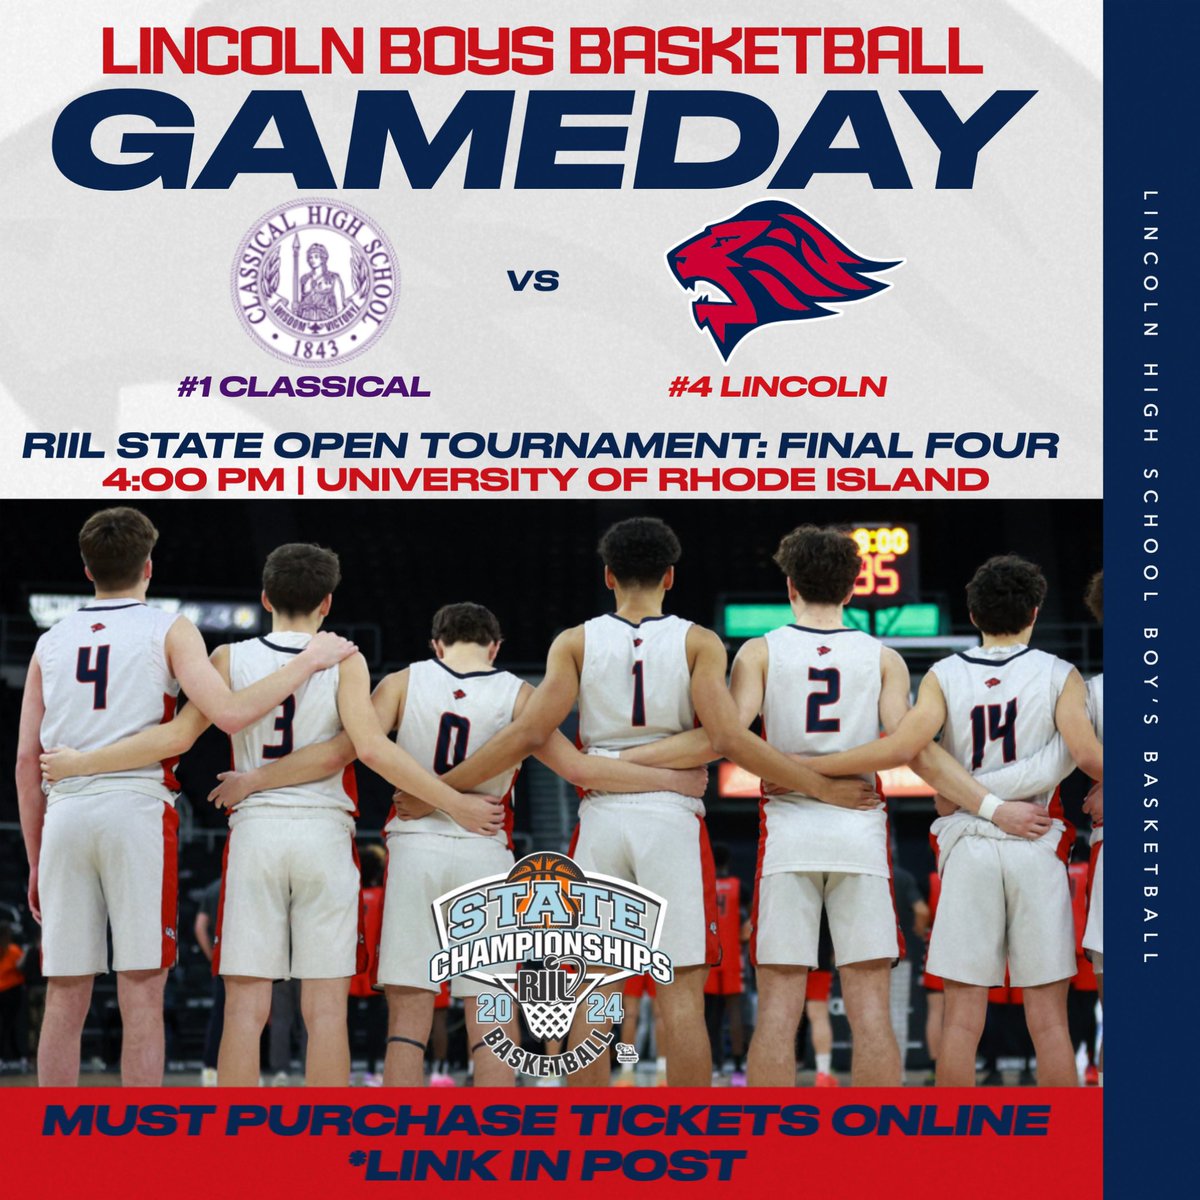 GAMEDAY‼️

🆚 Classical 
ℹ️ RIIL State Open Final 4
⌚️ 4:00 PM
🎟️ shorturl.at/hsyNW
📍 University of Rhode Island 
#GoLions 🦁

@LHSRI_Athletics | @LHSRI